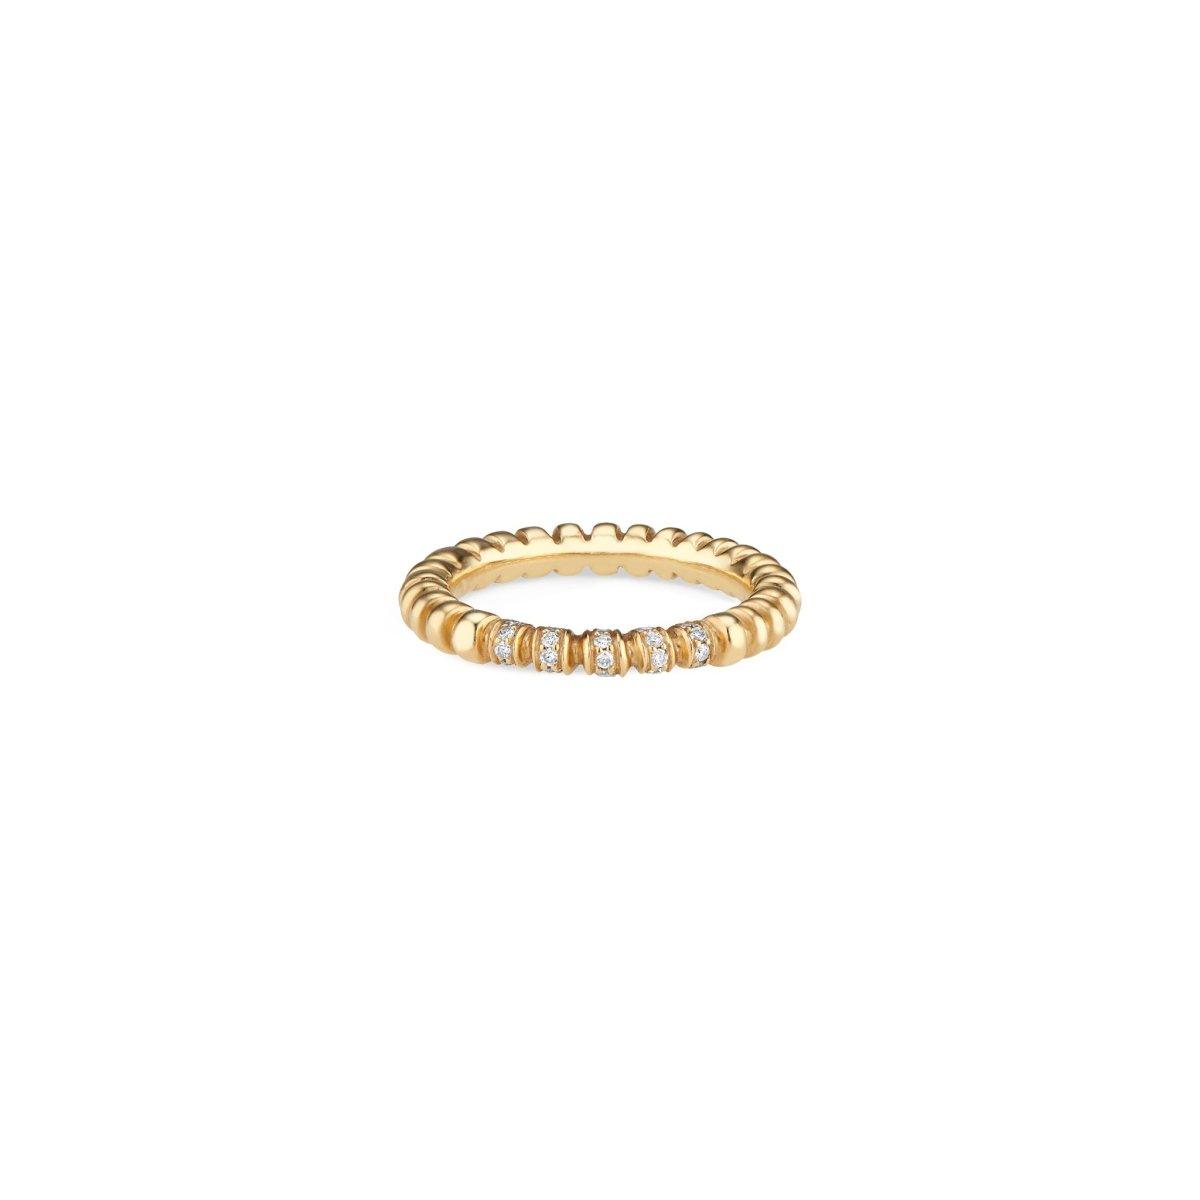 Gold Crown Band with Diamonds - Nataly Aponte